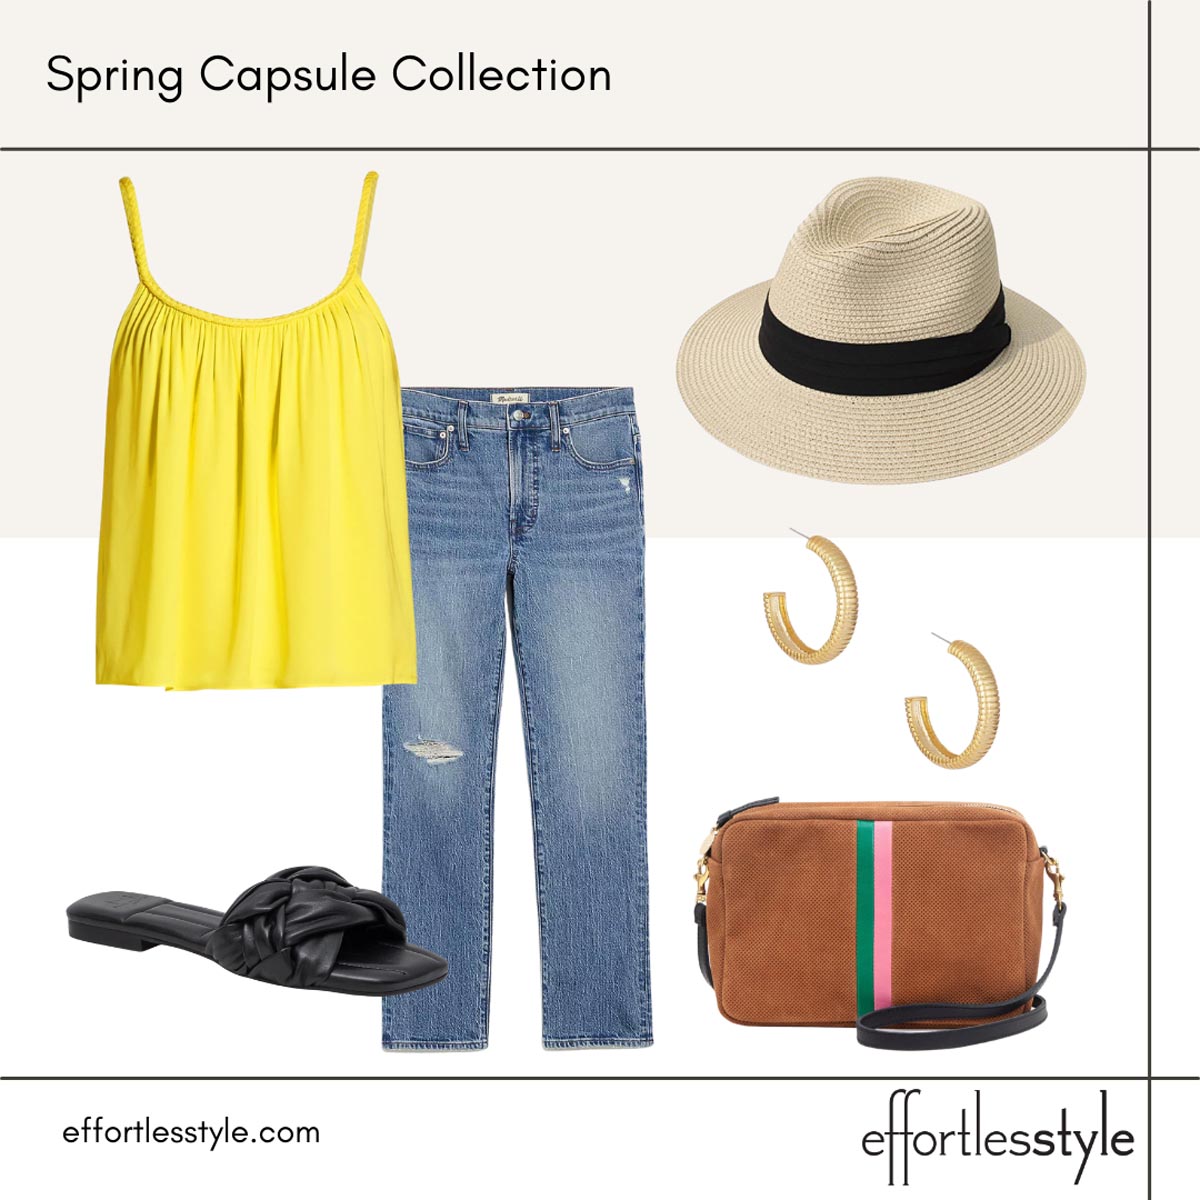 how to style a fedora for spring how to wear a fedora in the spring how to style jeans and a tank